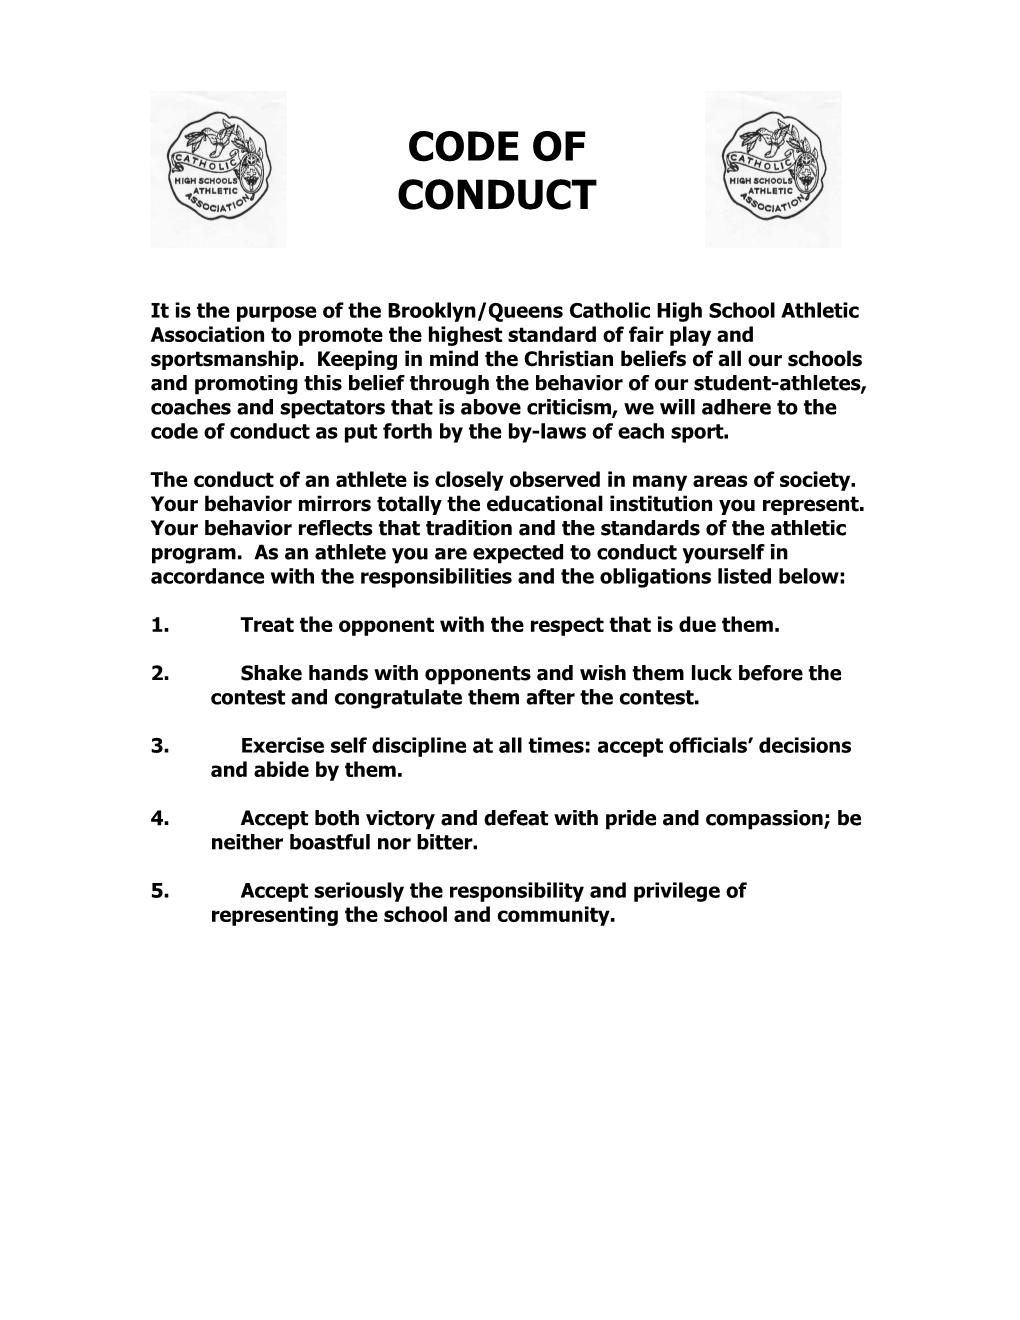 Code of Conduct s1